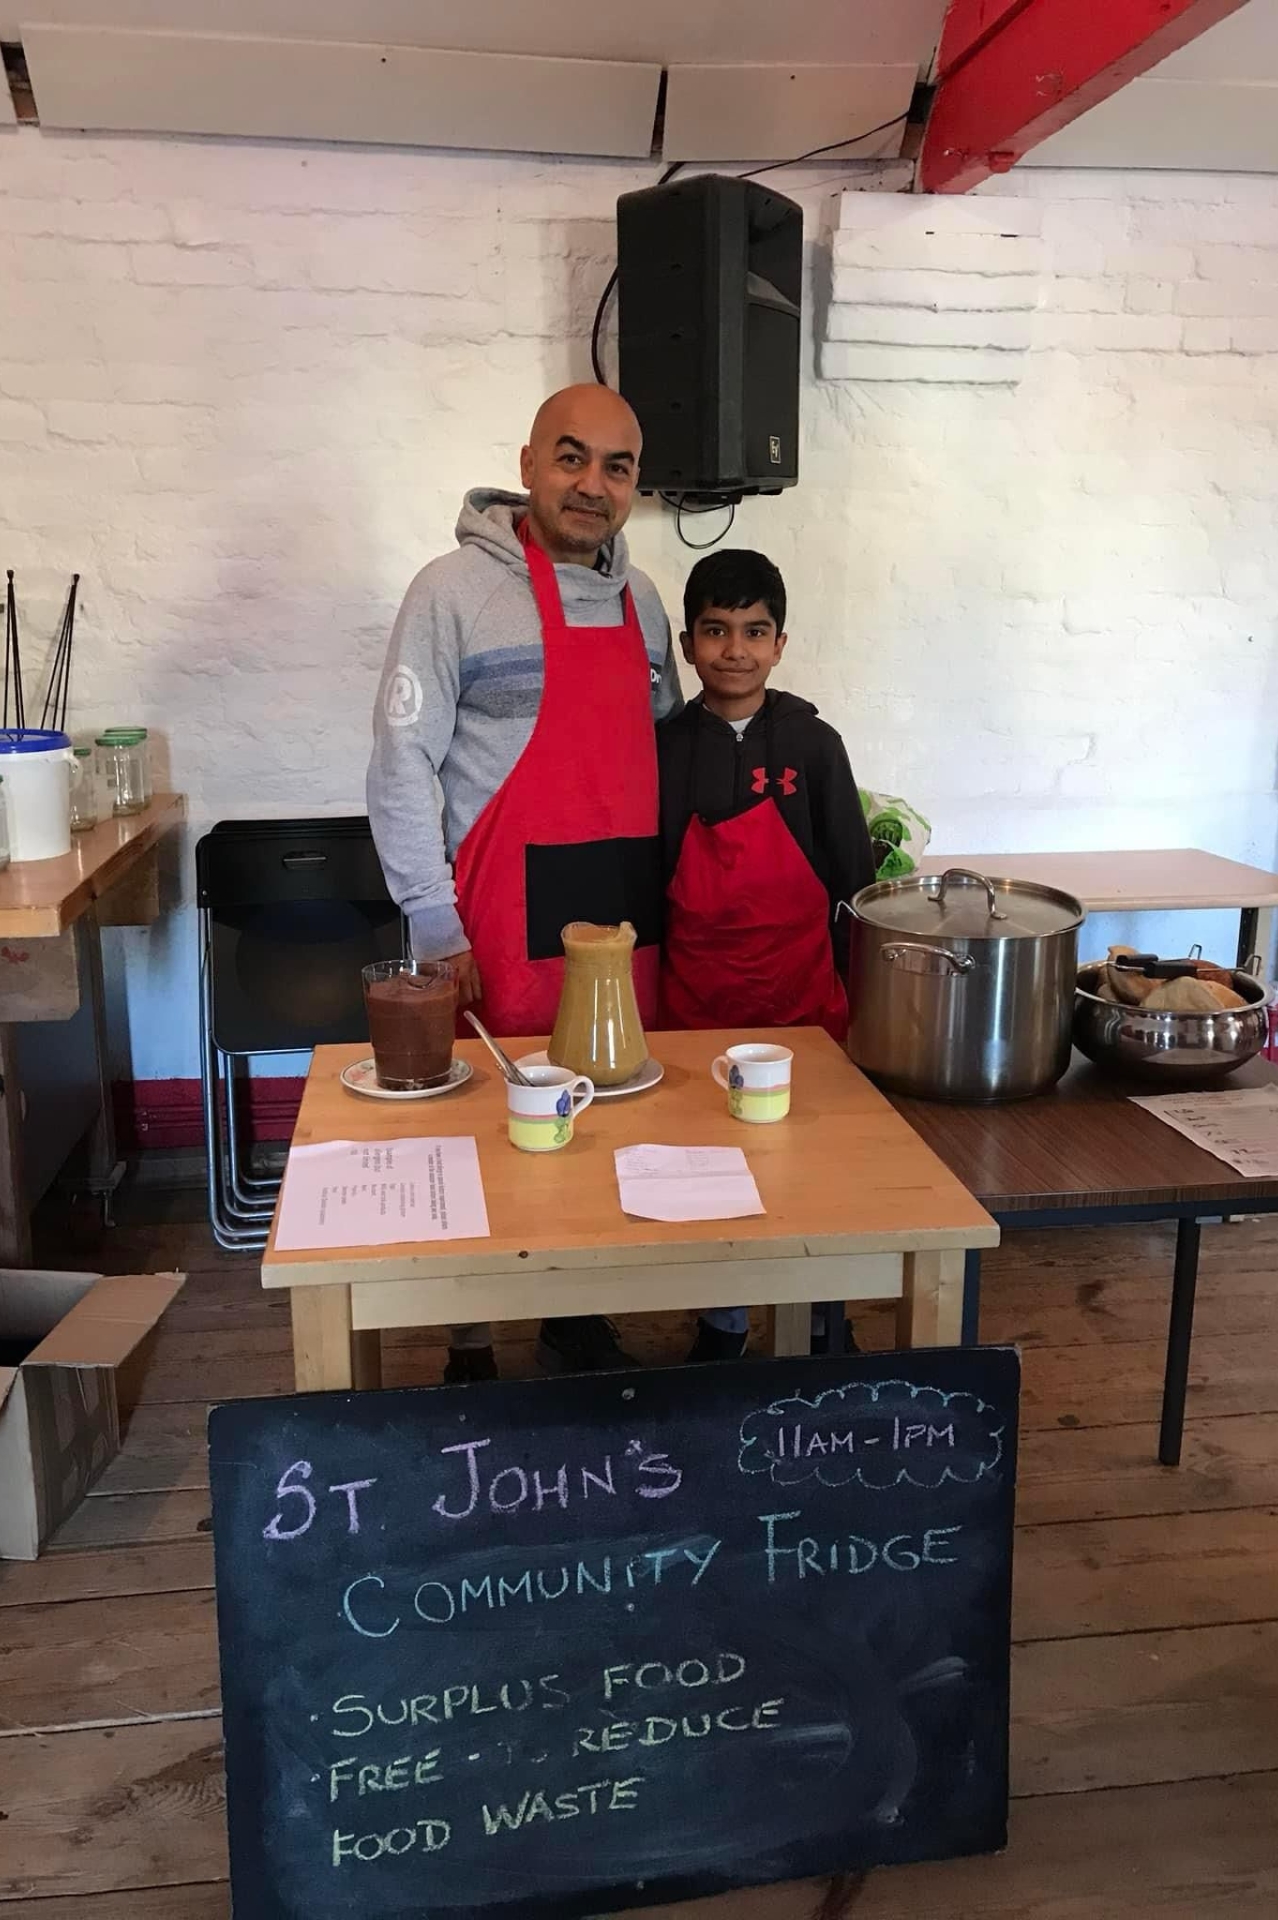 Man and his son wearing red aprons stood behind a chalk written sign reading St John's Community Fridge